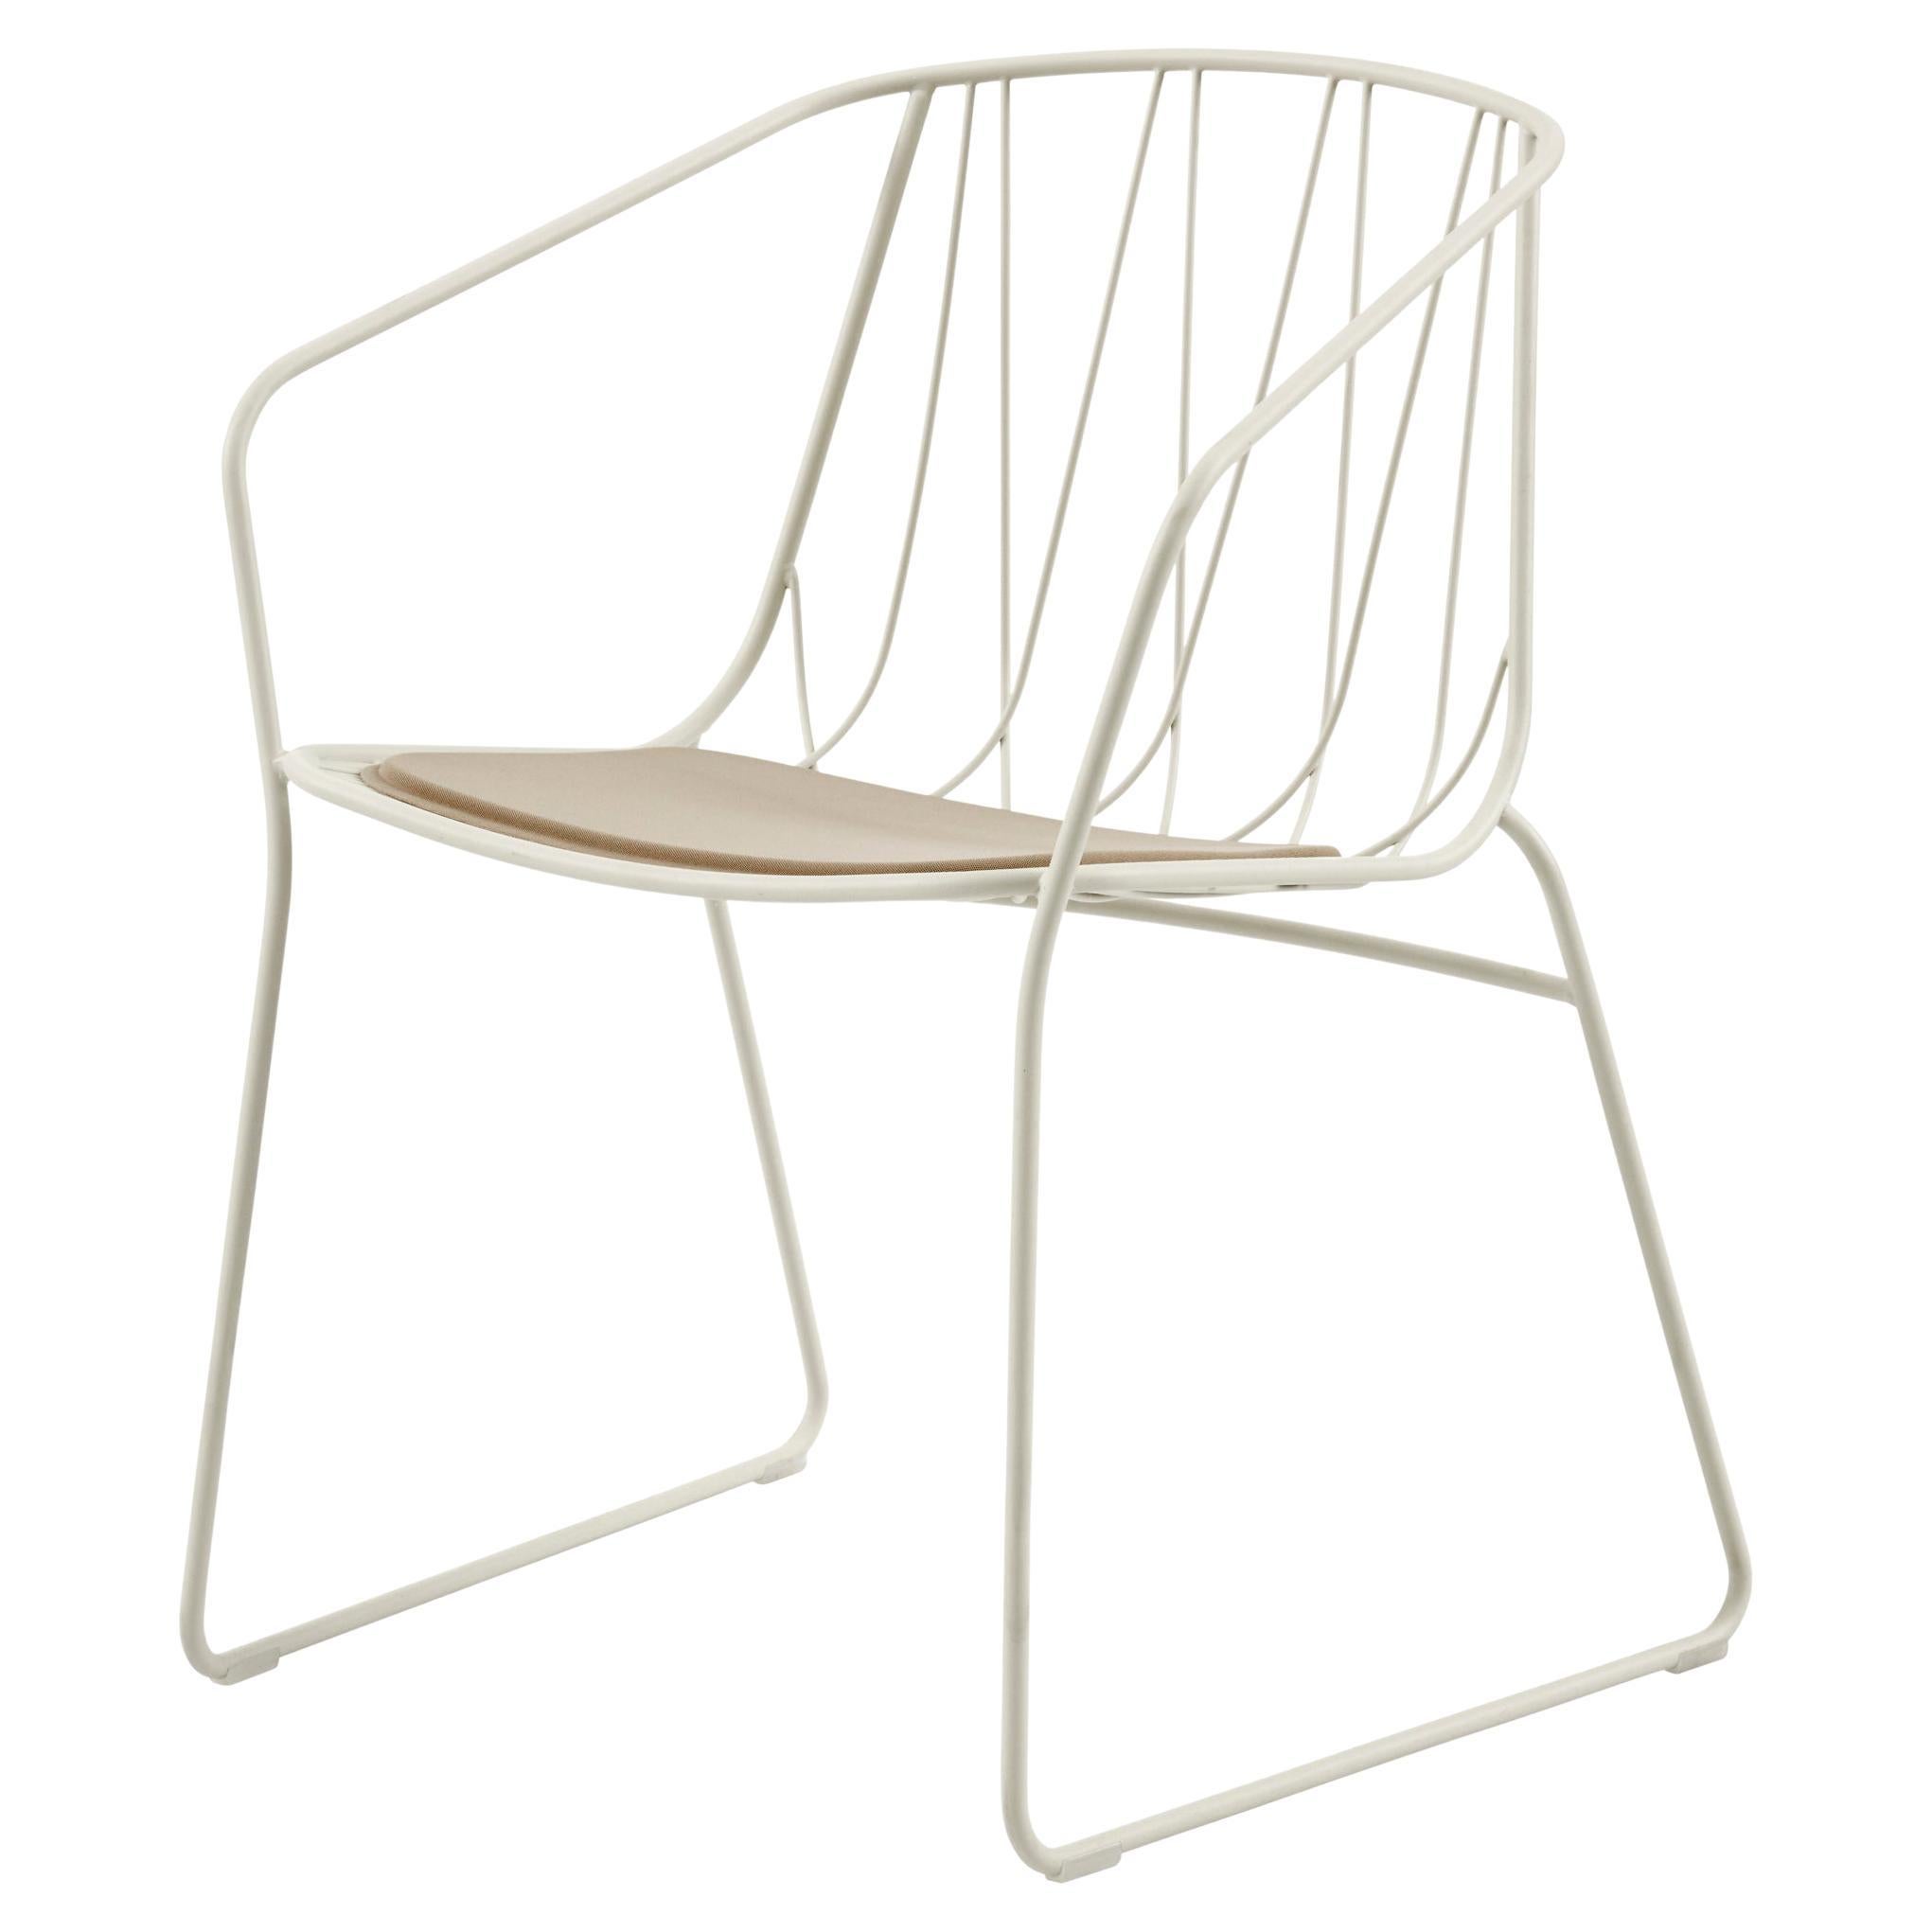 SP01 Chee Chair with Arms in White, Made in Italy